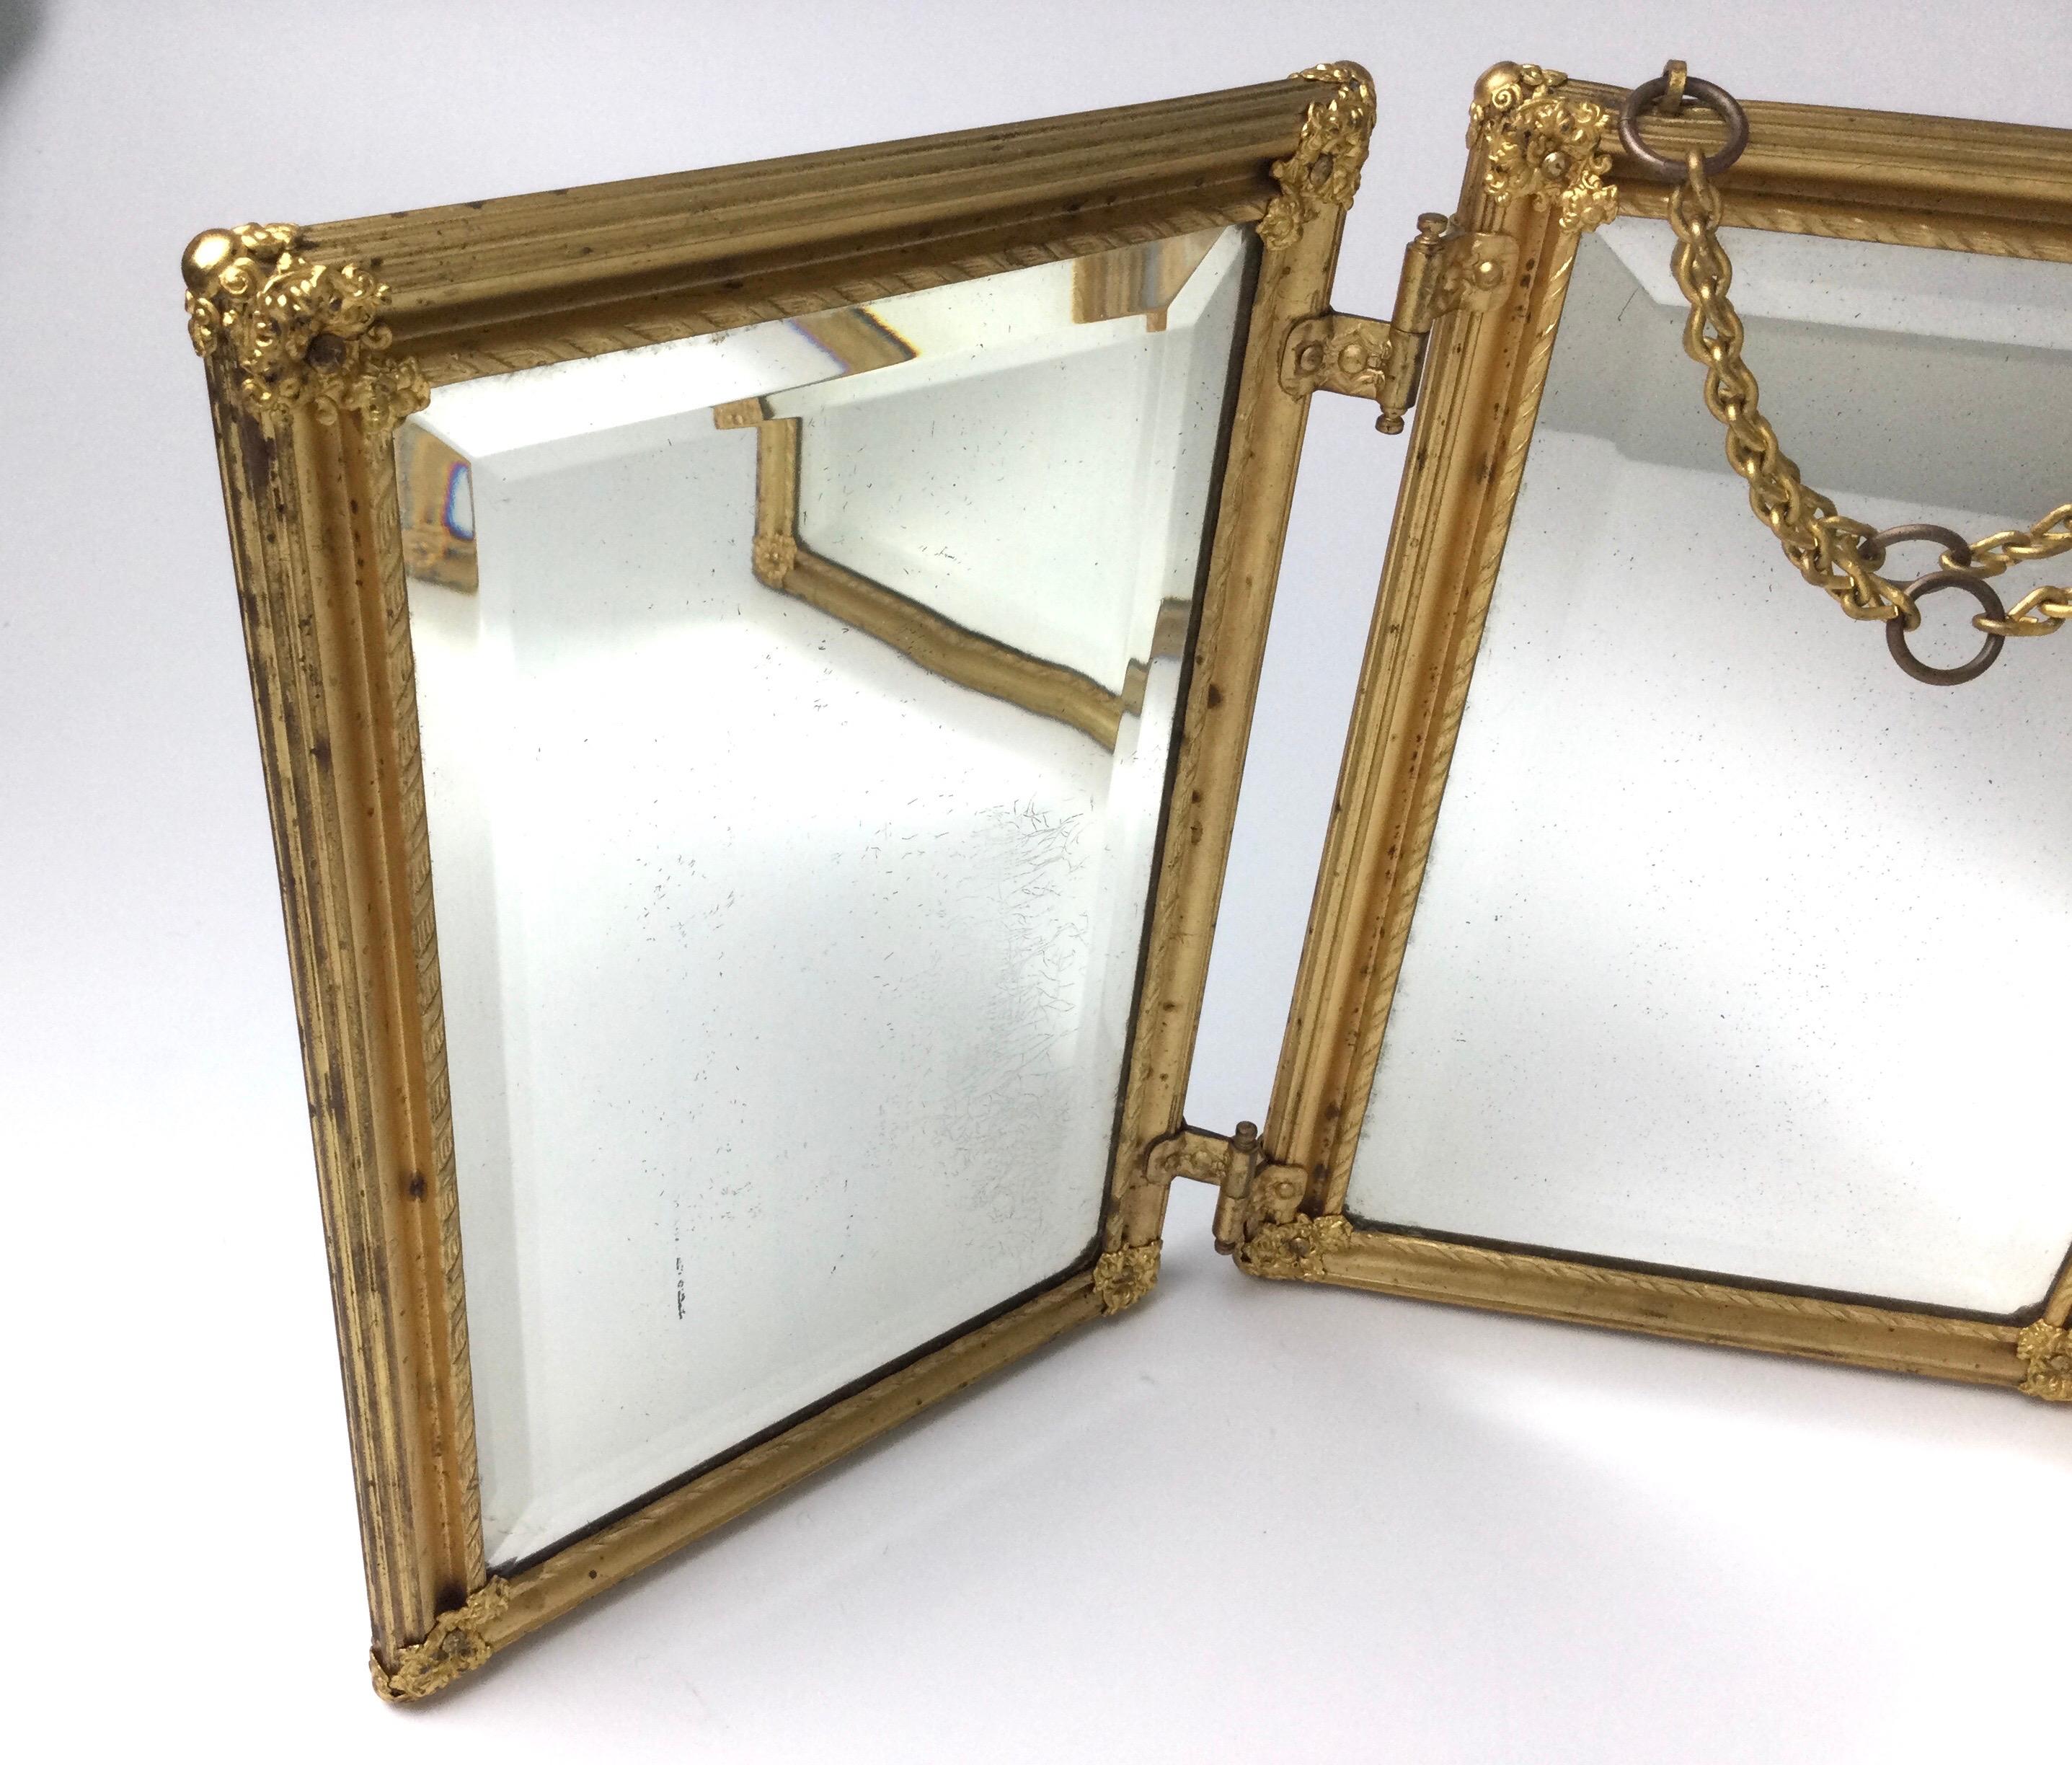 French gold gilded tribute-fold travel or dresser shaving mirror. Folds flat. Nice beveled mirrors on all three panels. Each panel measures 10 1/4 by 7 1/4